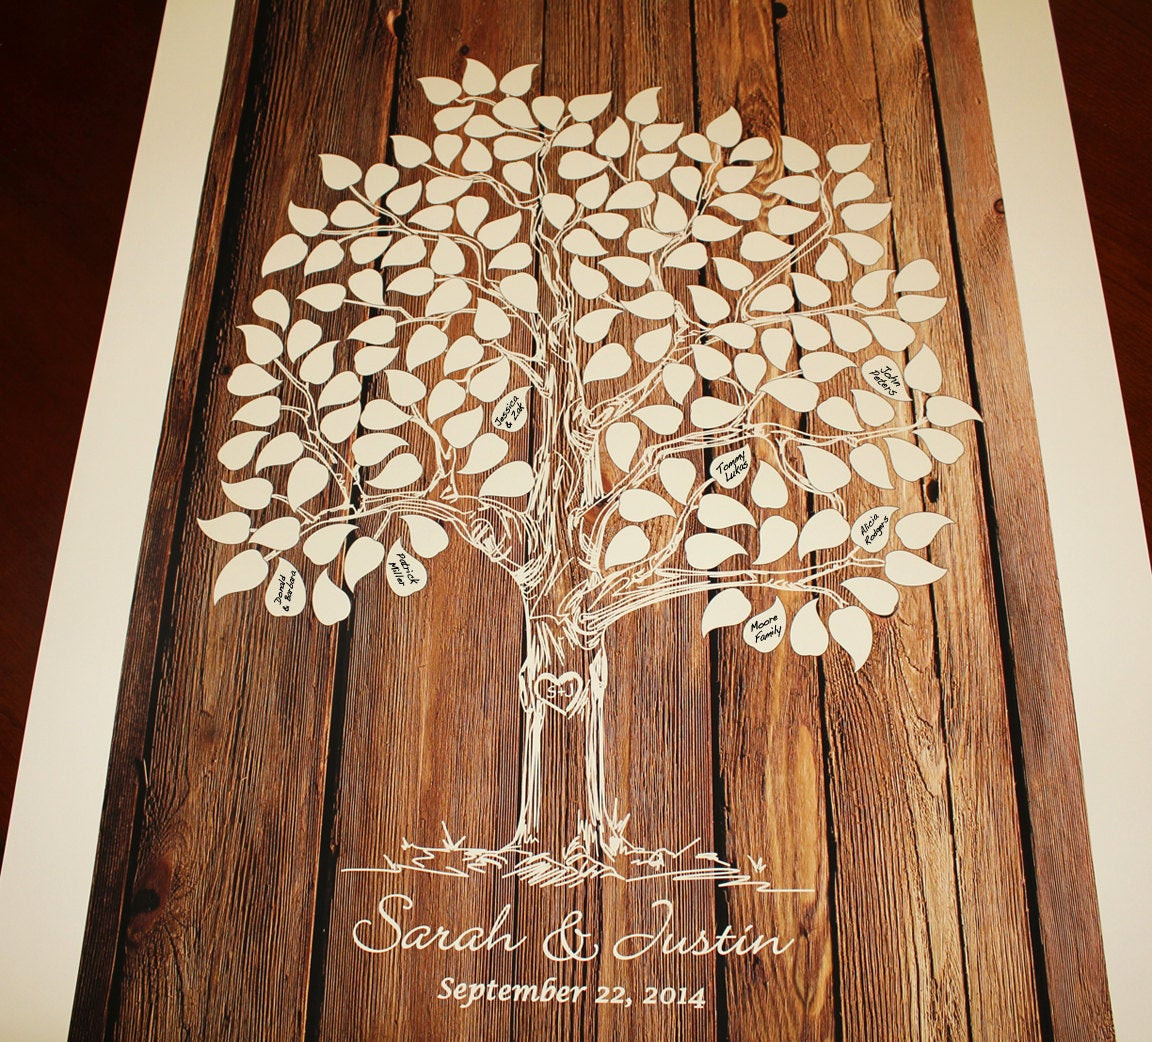 Tree Guest Book Wedding
 Guest Book Tree Wood Wedding Tree Guestbook Wedding Tree